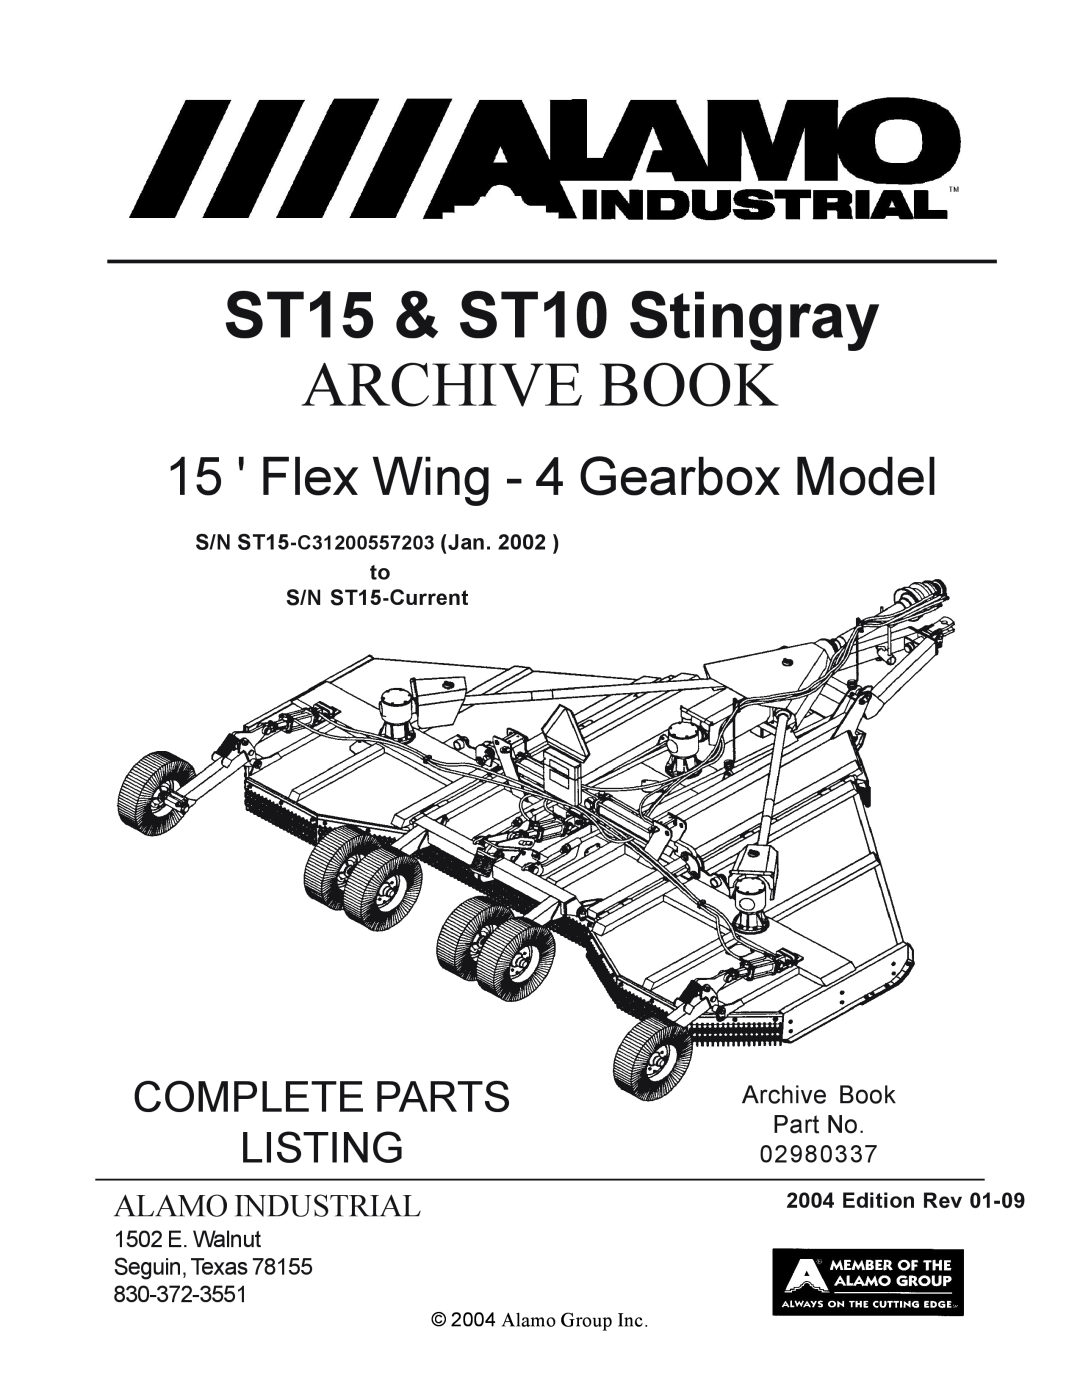 Alamo manual Flex Wing - 4 Gearbox Model, Listing, ST15 & ST10 Stingray, Archive Book, Complete Parts, Alamo Industrial 